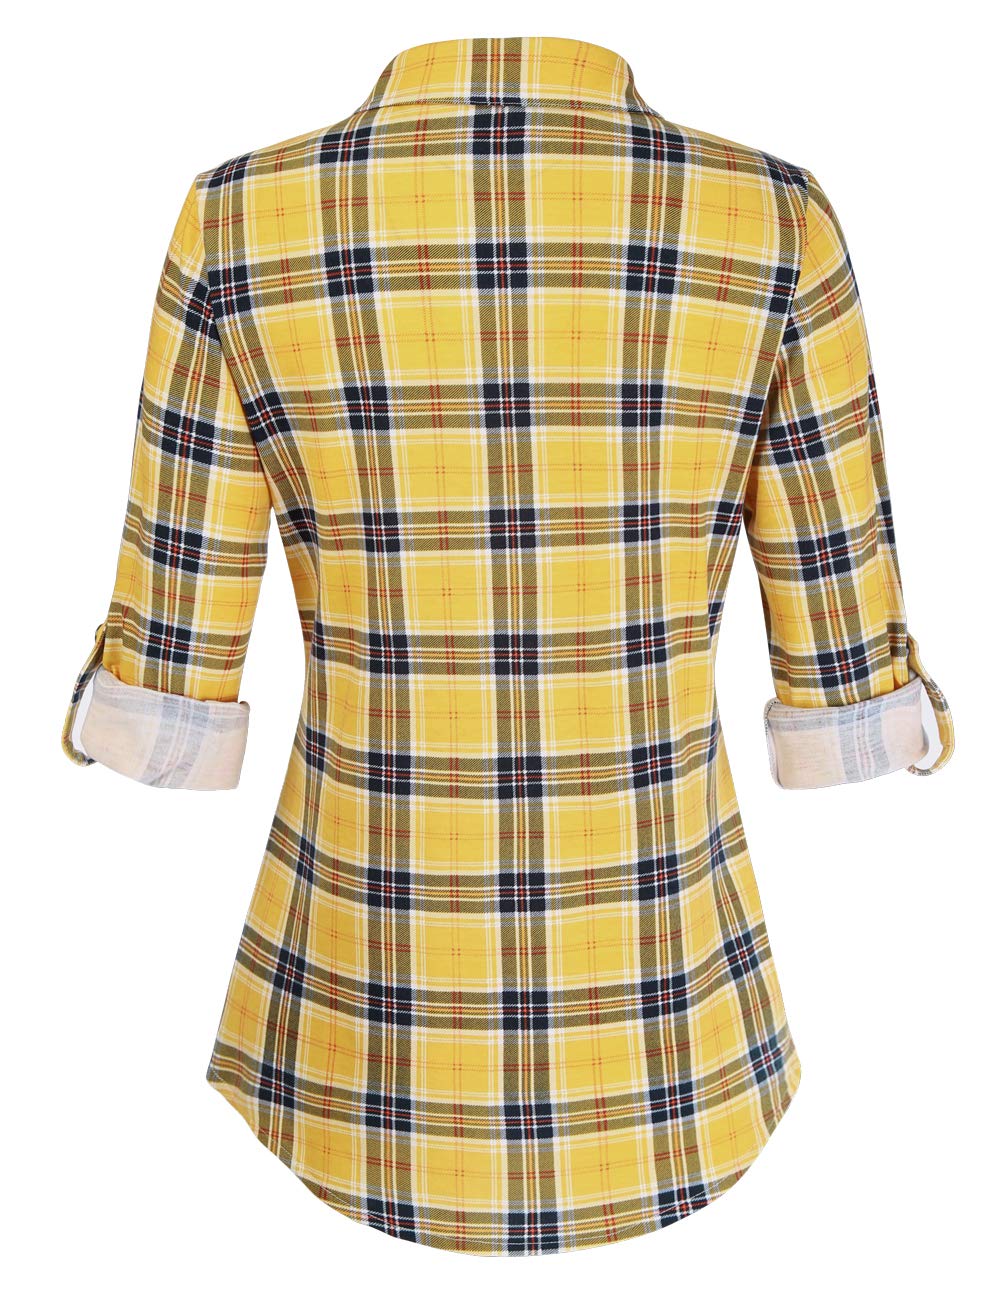 DJT Roll Up Long Sleeve Yellow Plaid Women’s Collared Button Down Plaid Shirt